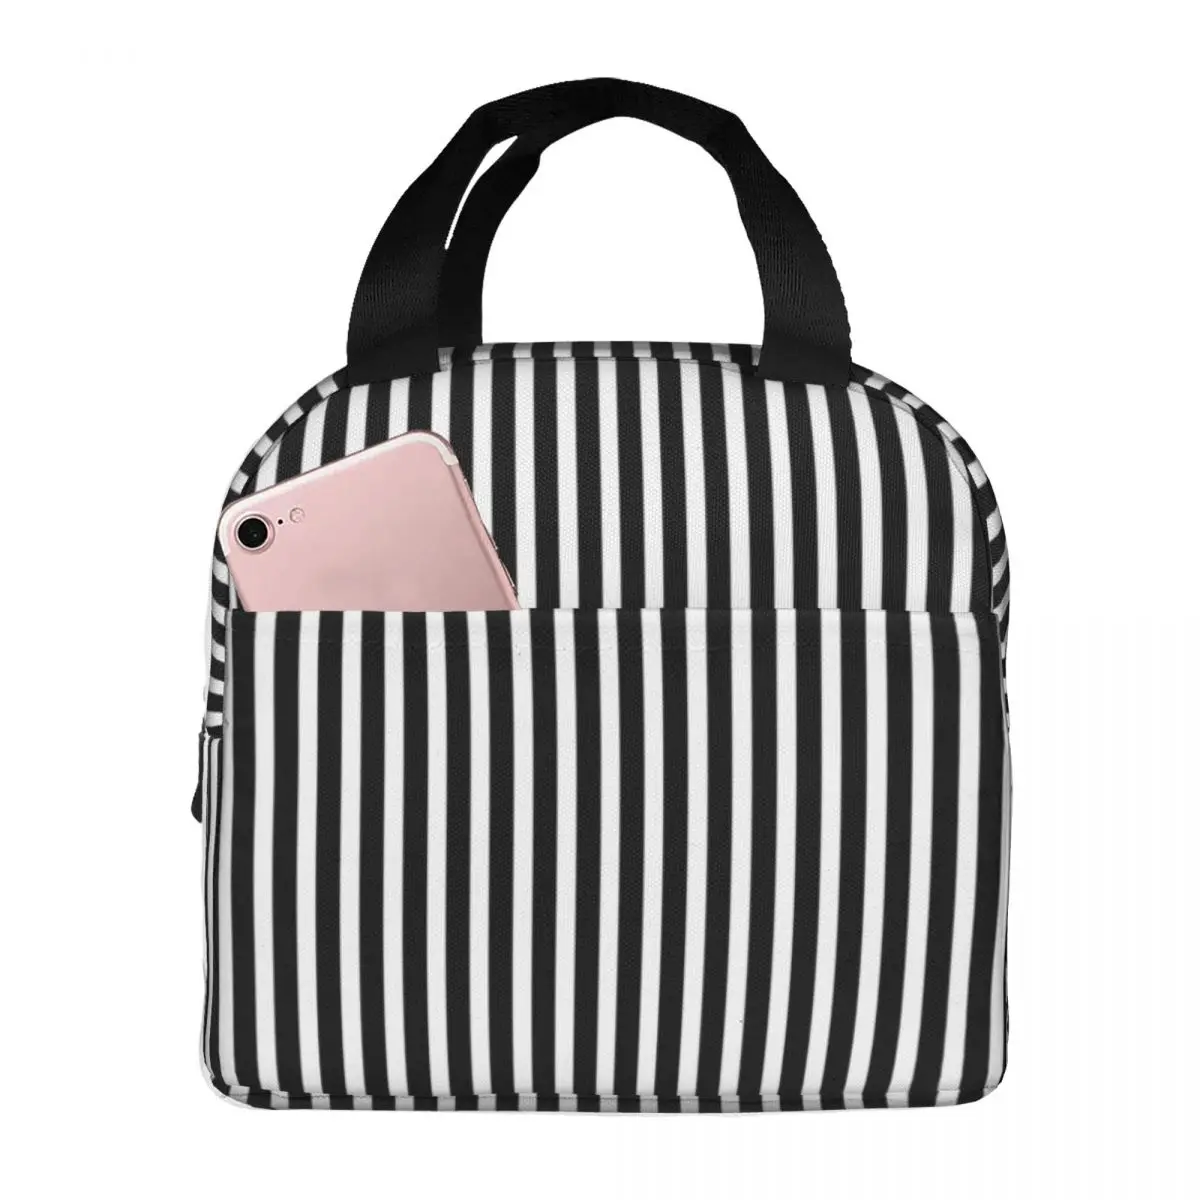 Black And White Stripe Lunch Bag Portable Insulated Canvas Cooler Bag Thermal Cold Food Picnic Tote for Women Kids